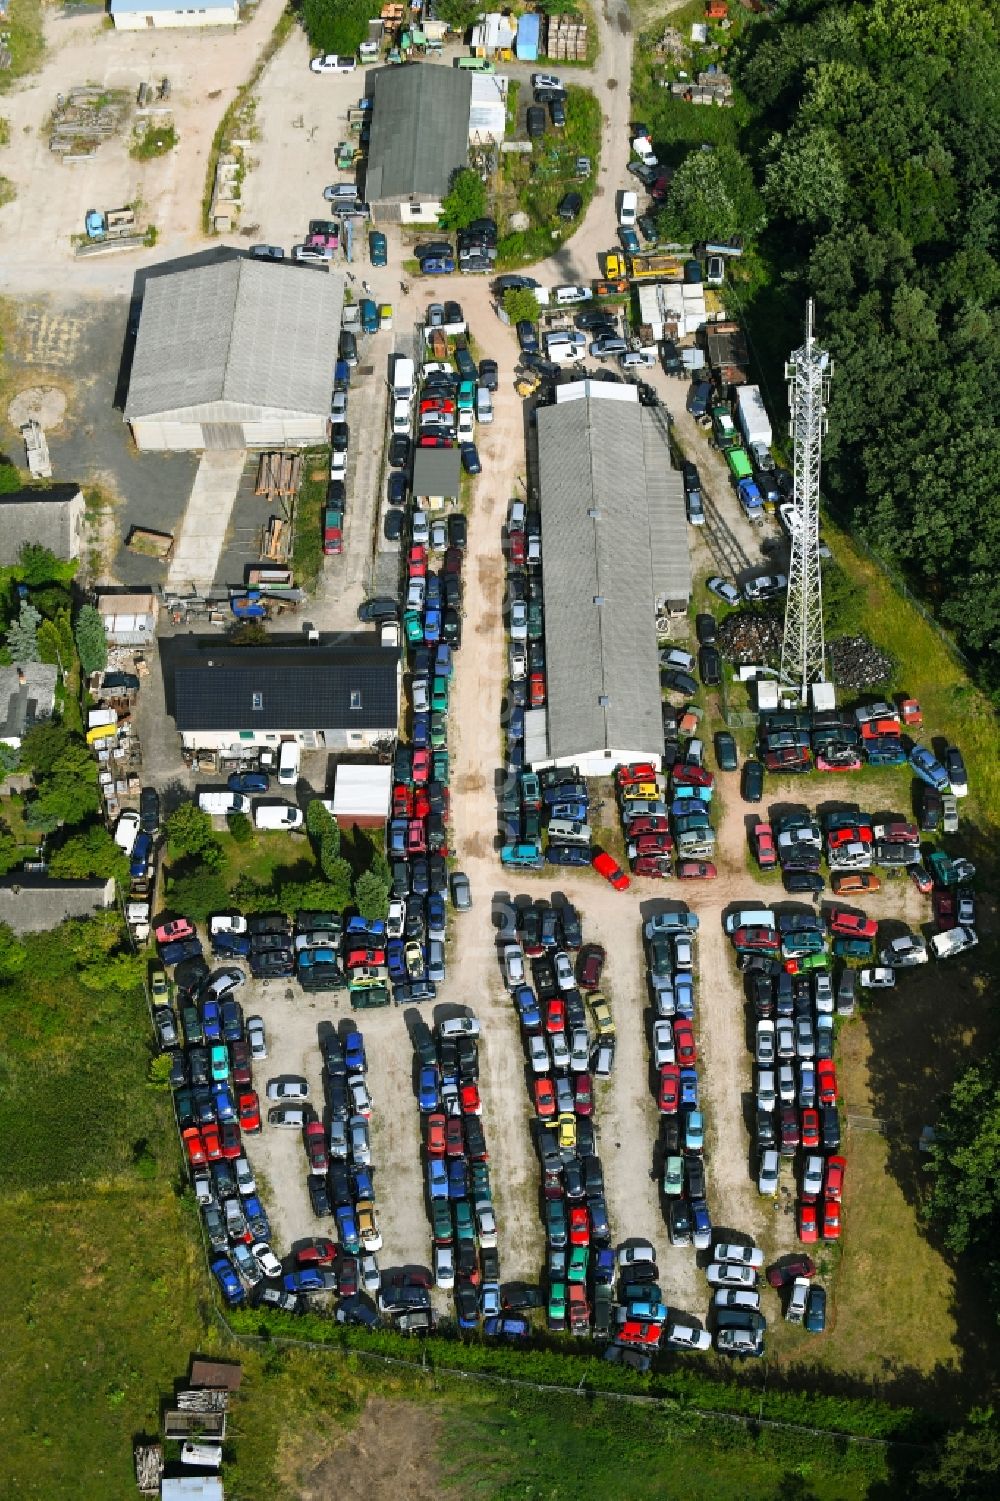 Aerial image Falkenberg - Scrapyard for recycling of cars cars and used vehicles with decomposition and aftermarket Autoverwertung Domke-Krause in Gewerbegebiet in Falkenberg in the state Brandenburg, Germany